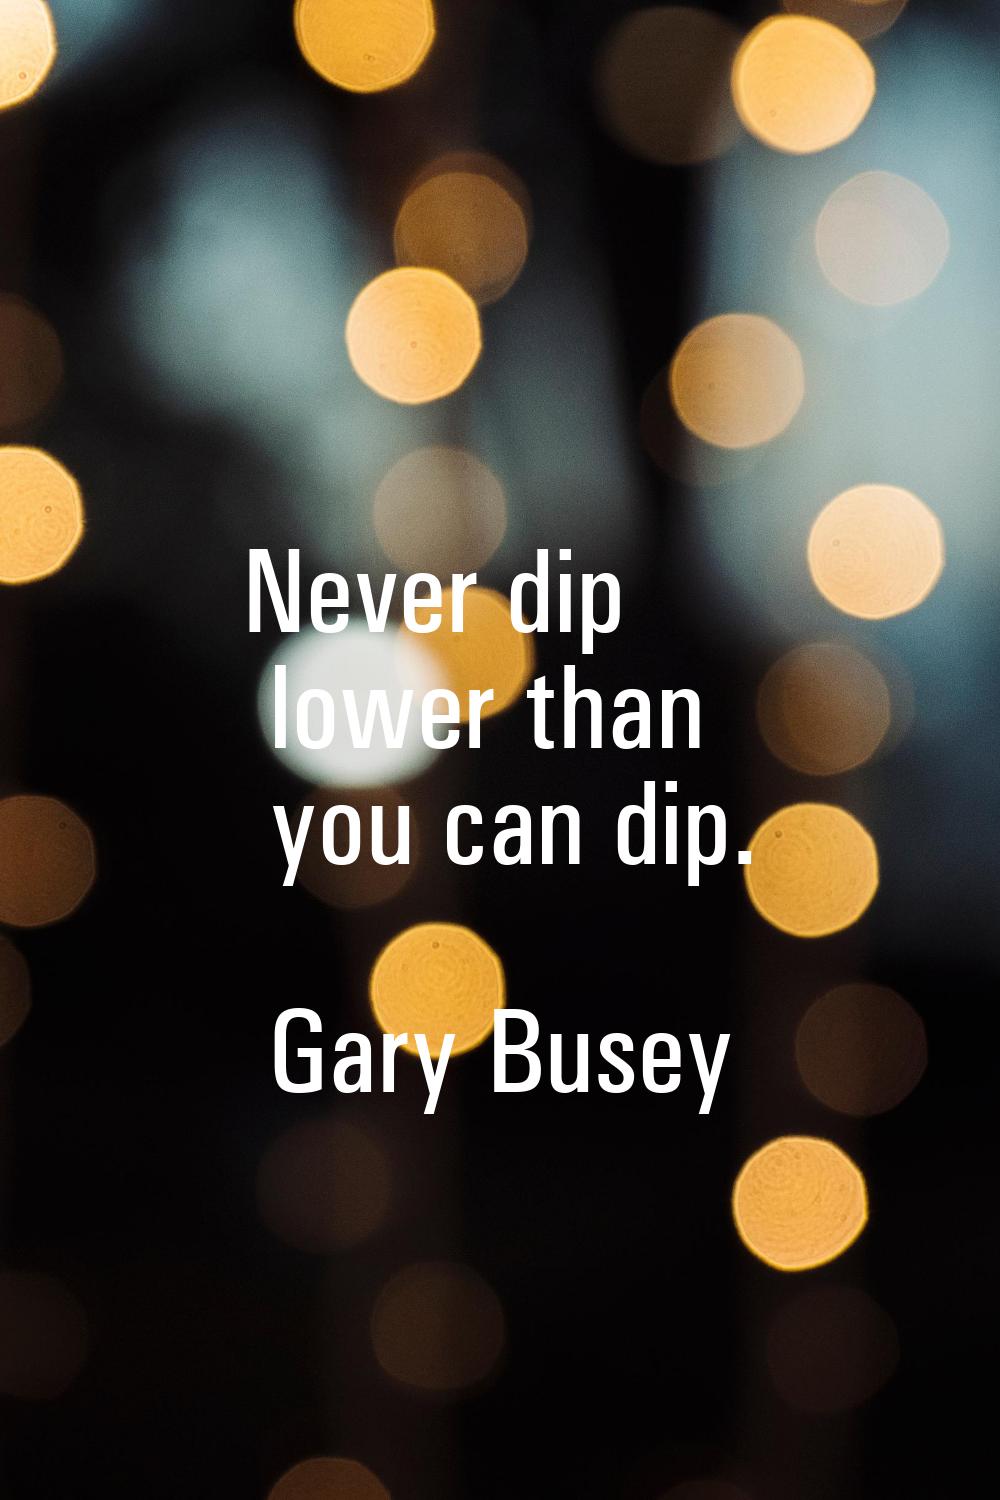 Never dip lower than you can dip.